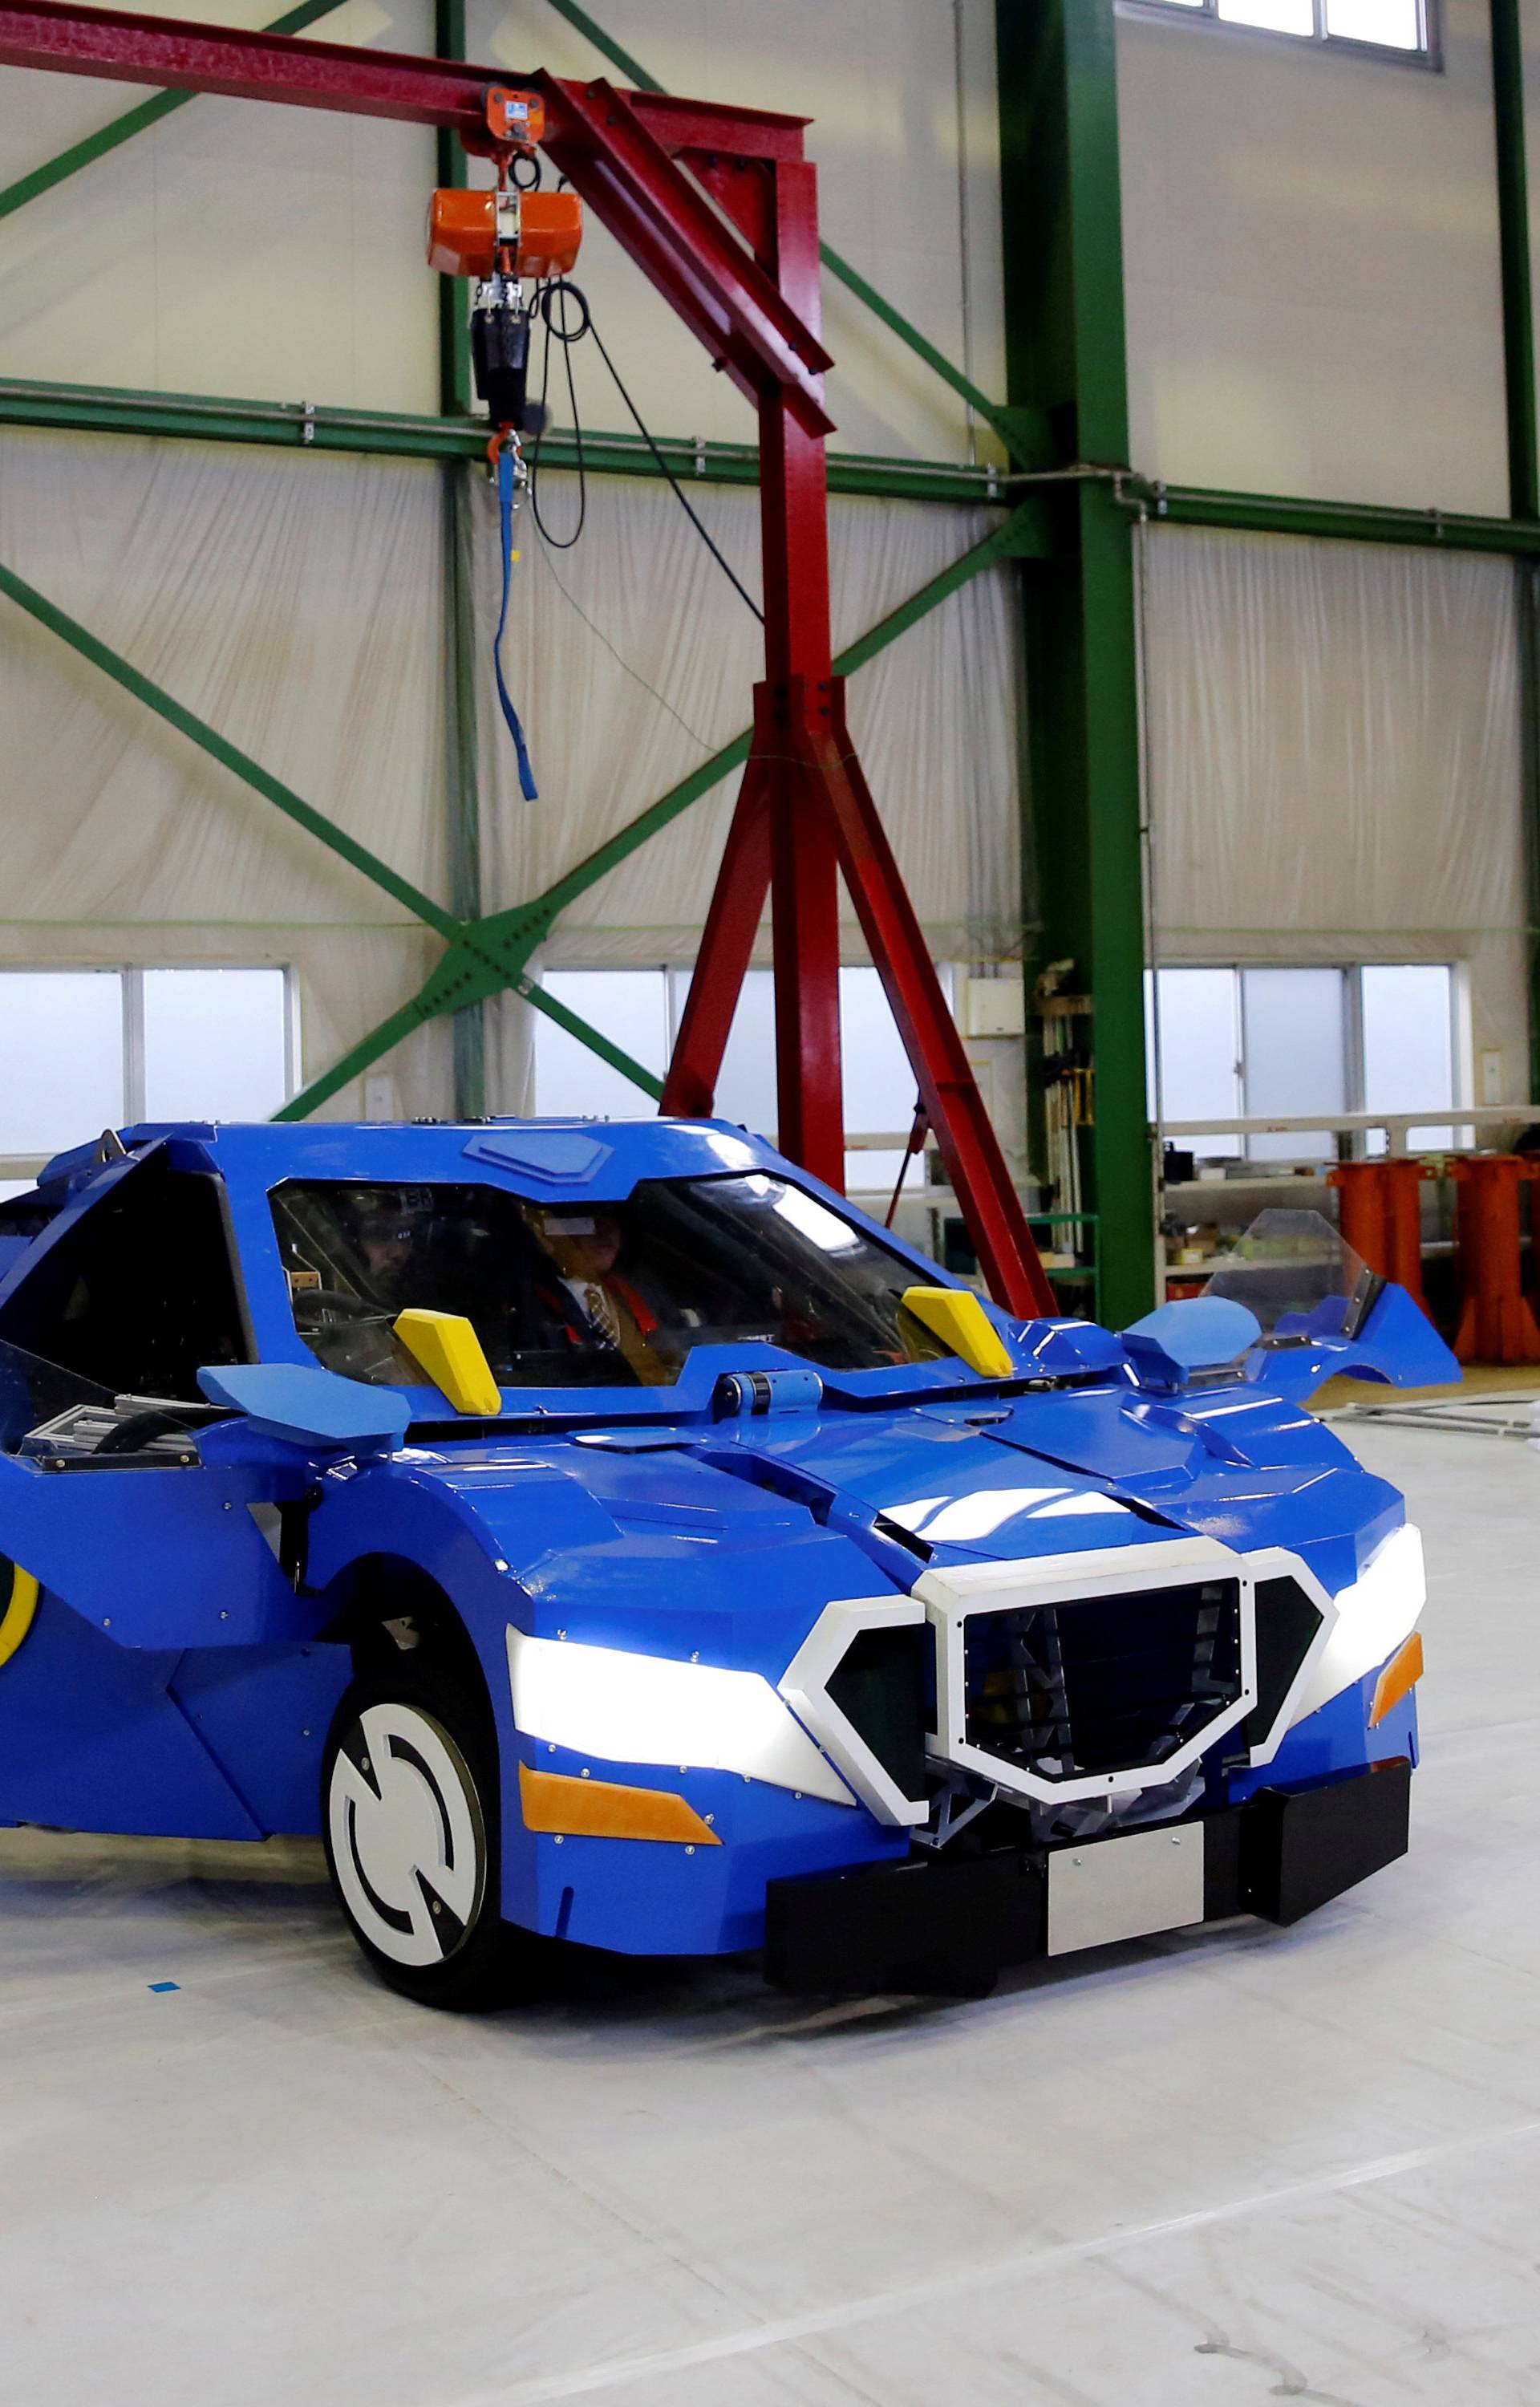 A new transforming robot called "J-deite RIDE" that transforms itself into a passenger vehicle, developed by Brave Robotics Inc, Asratec Corp and Sansei Technologies Inc, is demonstrated during its unveiling at a factory near Tokyo